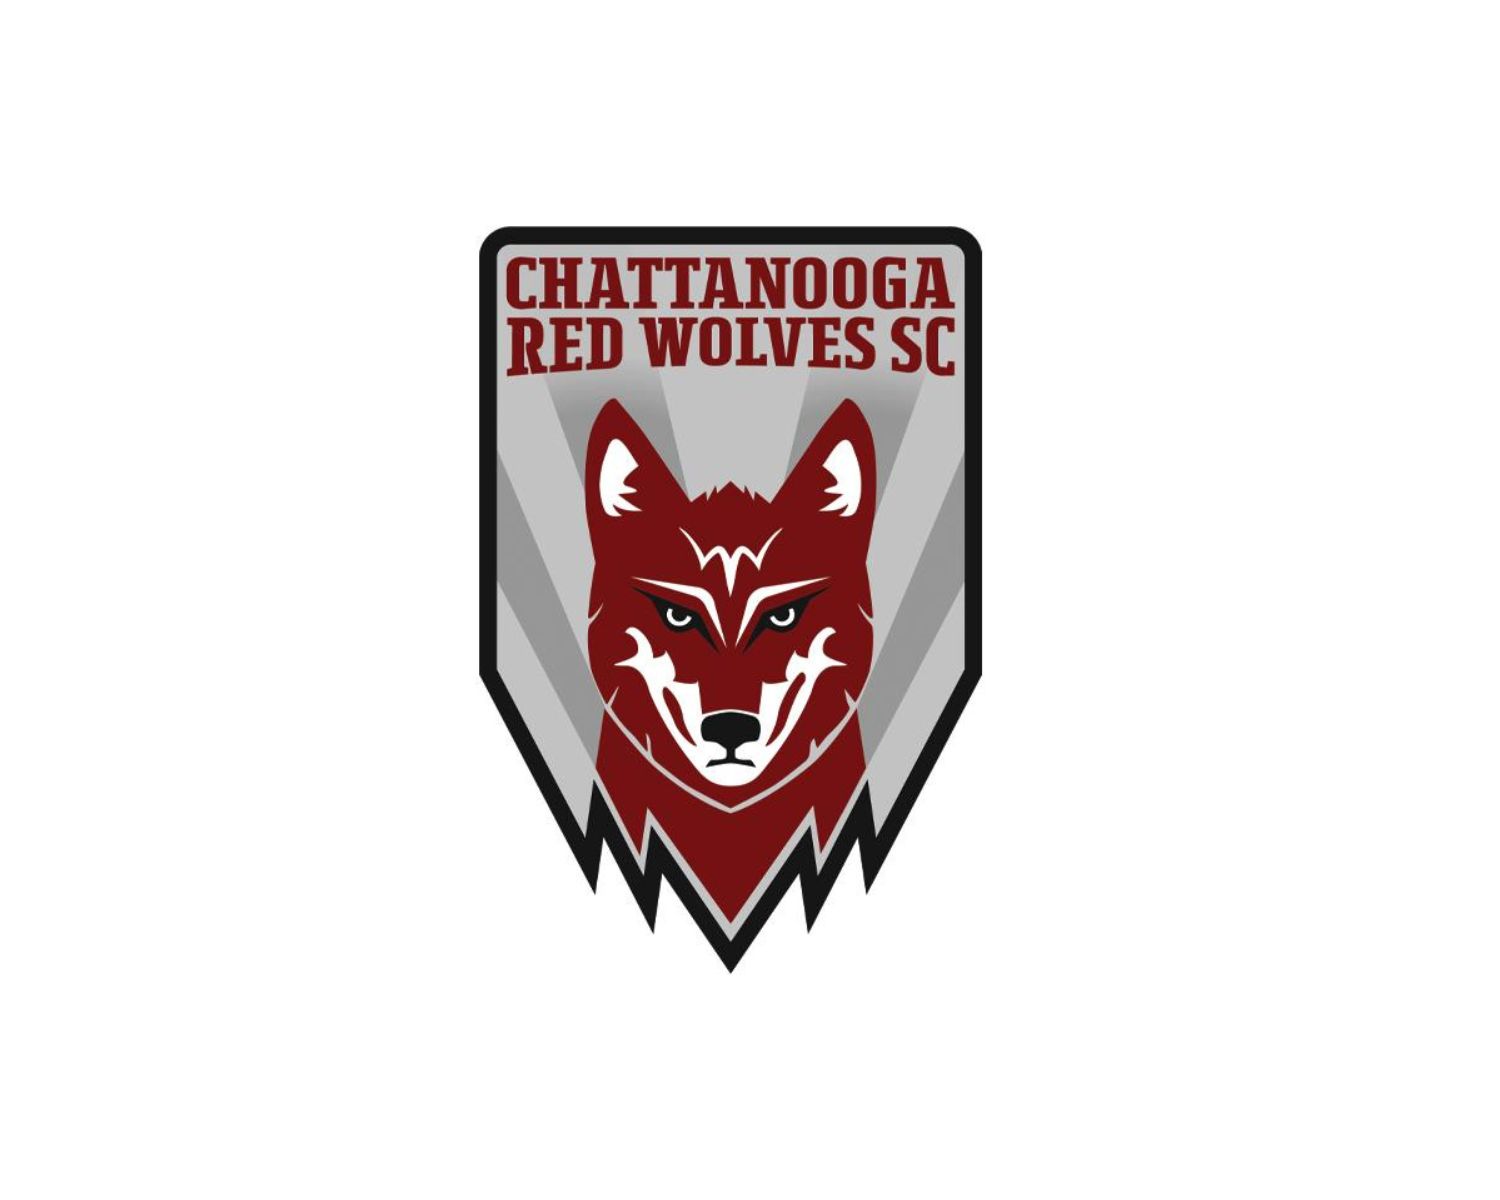 chattanooga-red-wolves-sc-12-football-club-facts